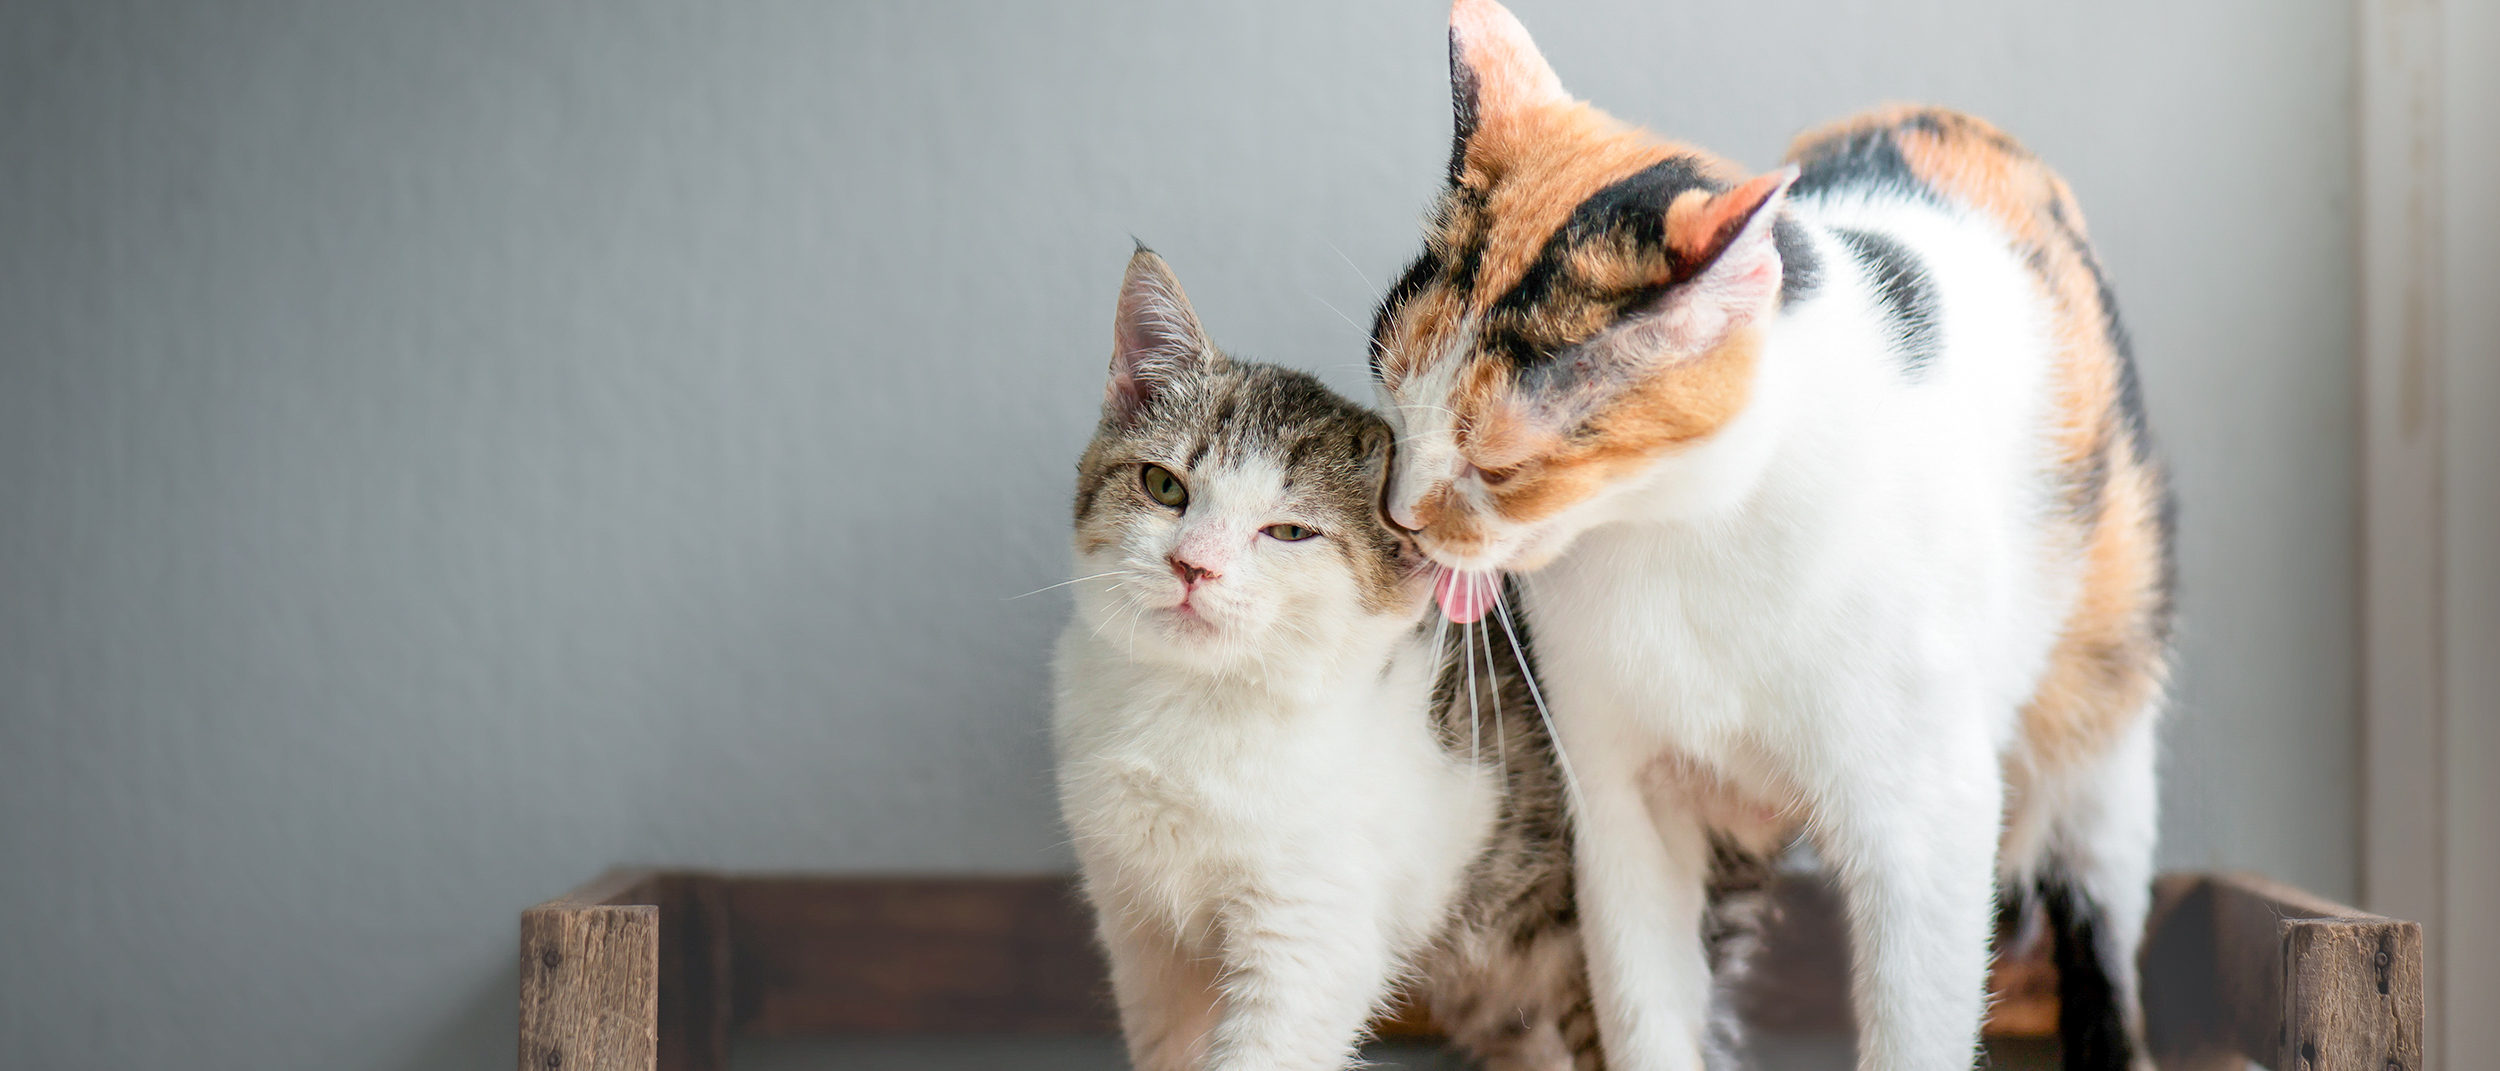 Adult cat standing next to a kitten licking its ear.